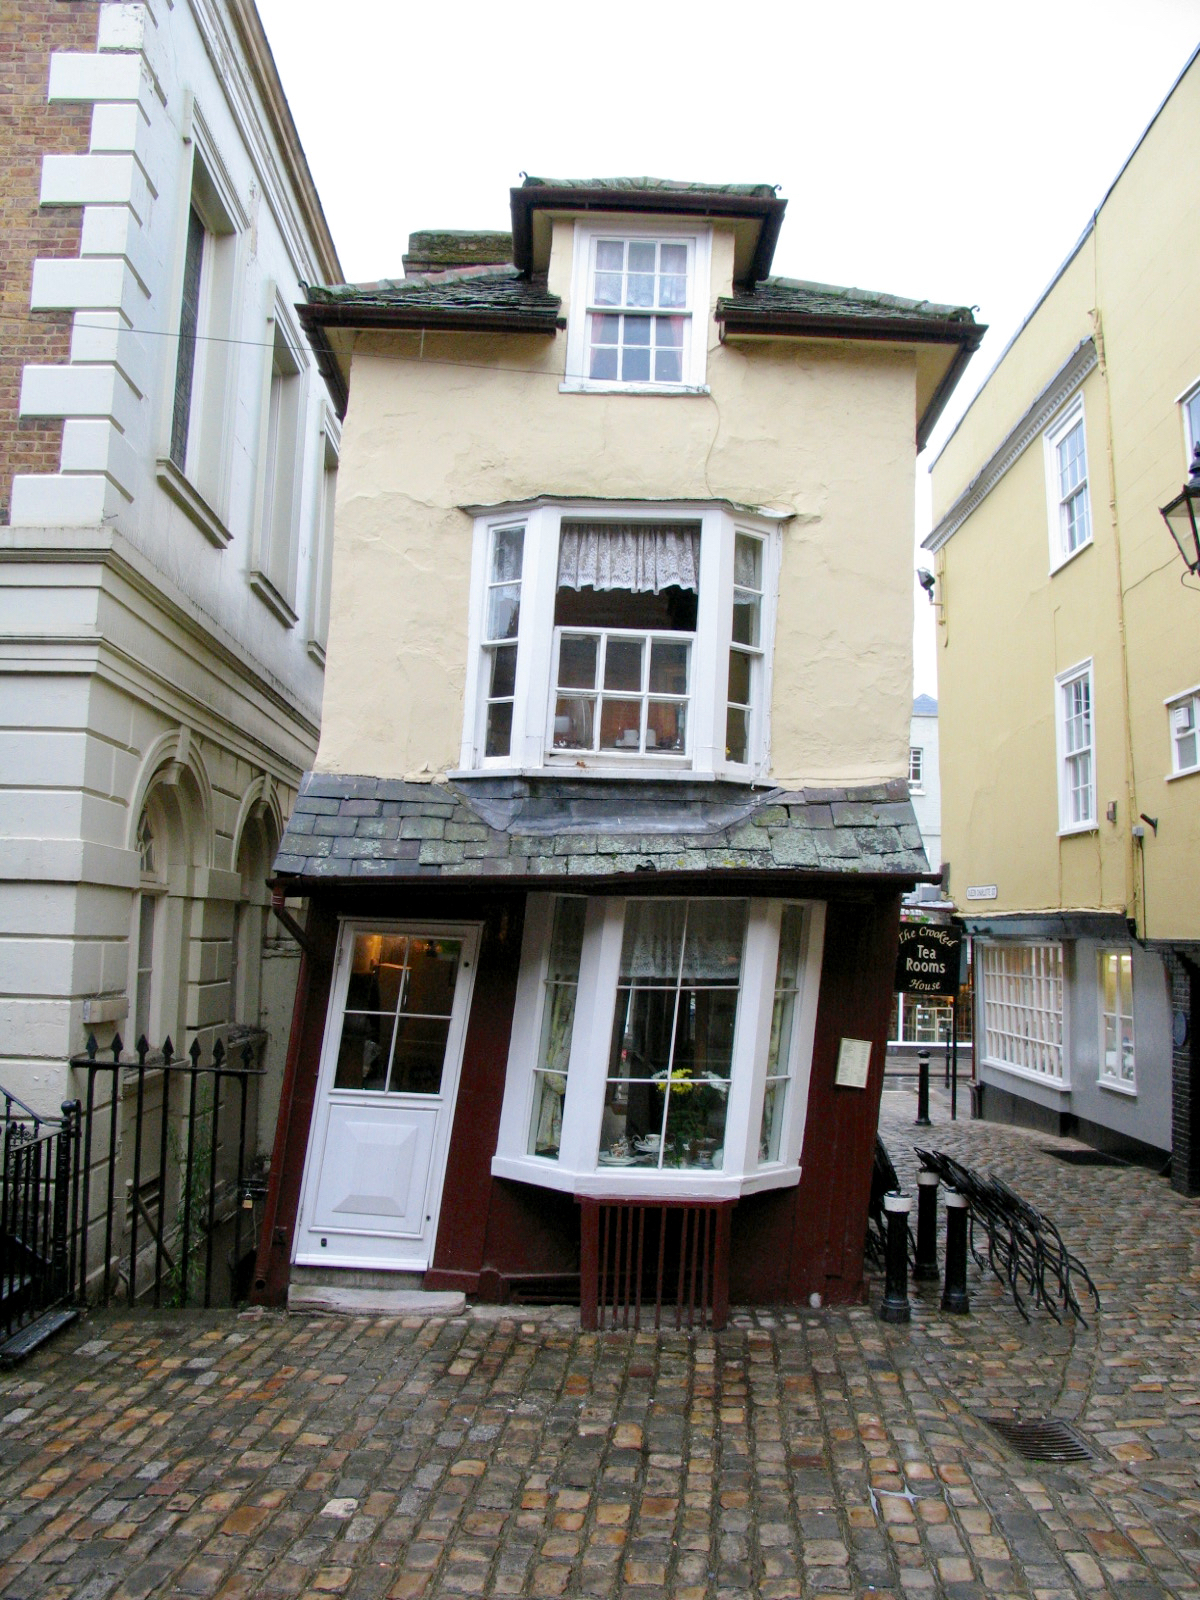 Crooked house...